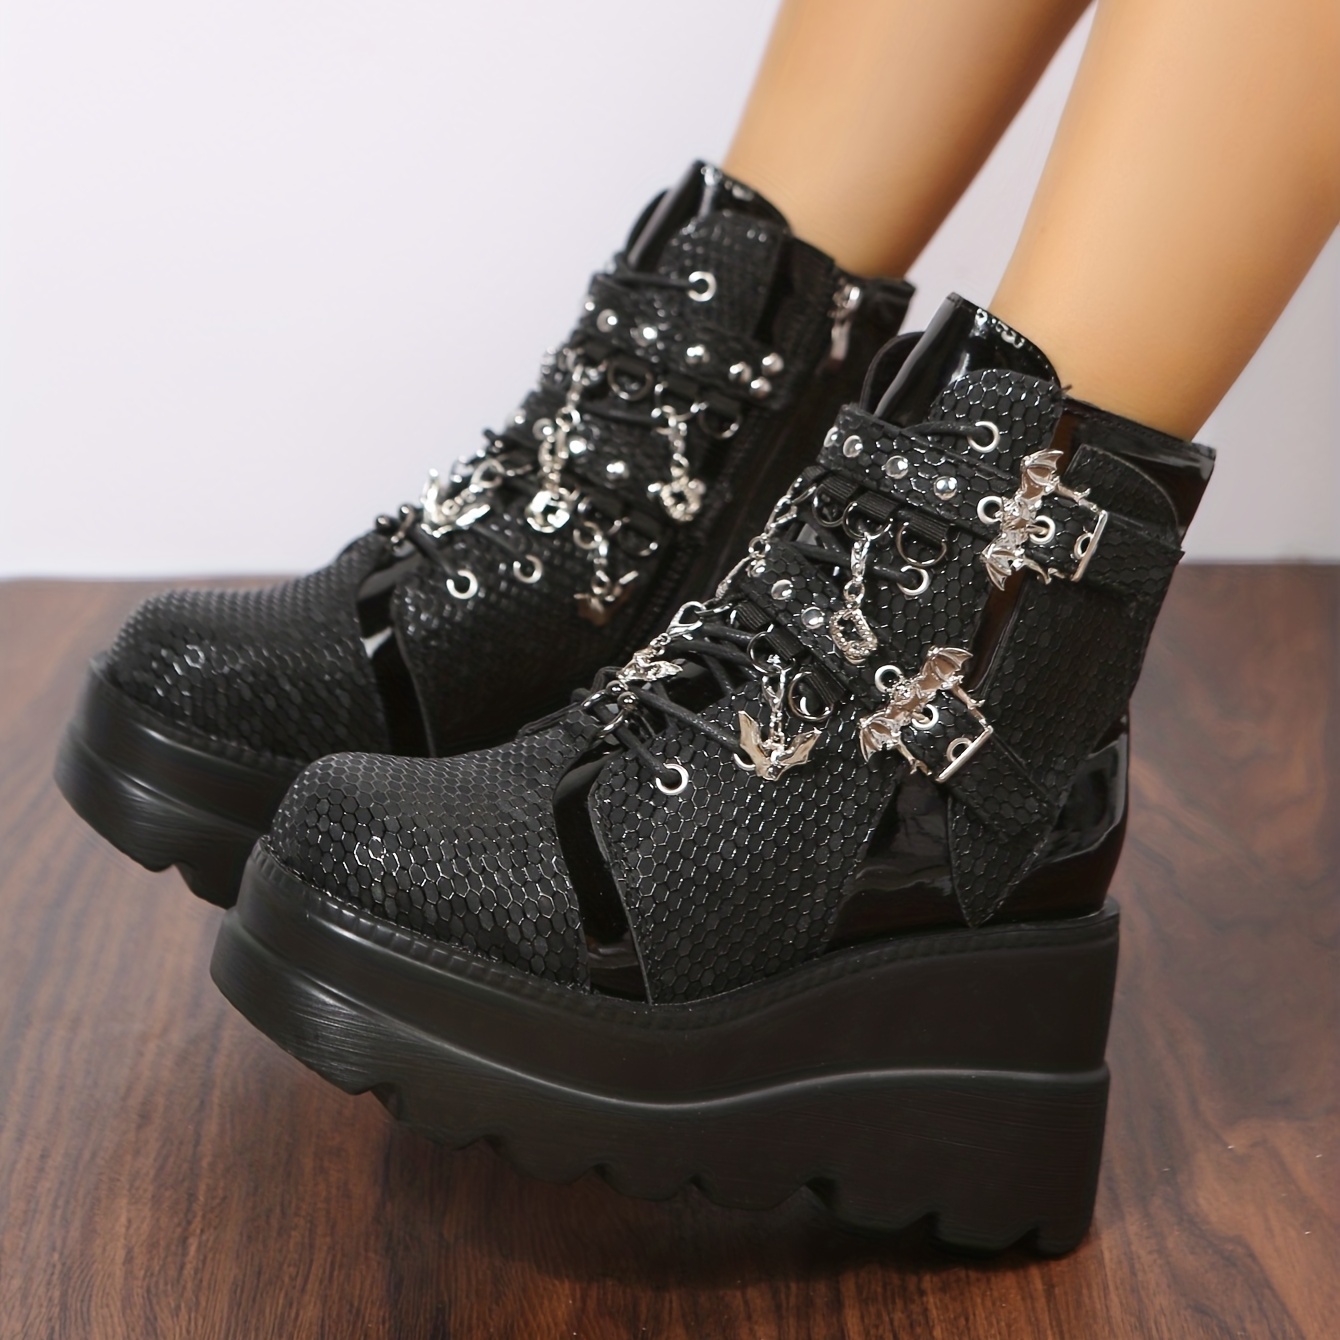 Black Lace Up High Top Platforms Punk Rock Chunky Heels Boots